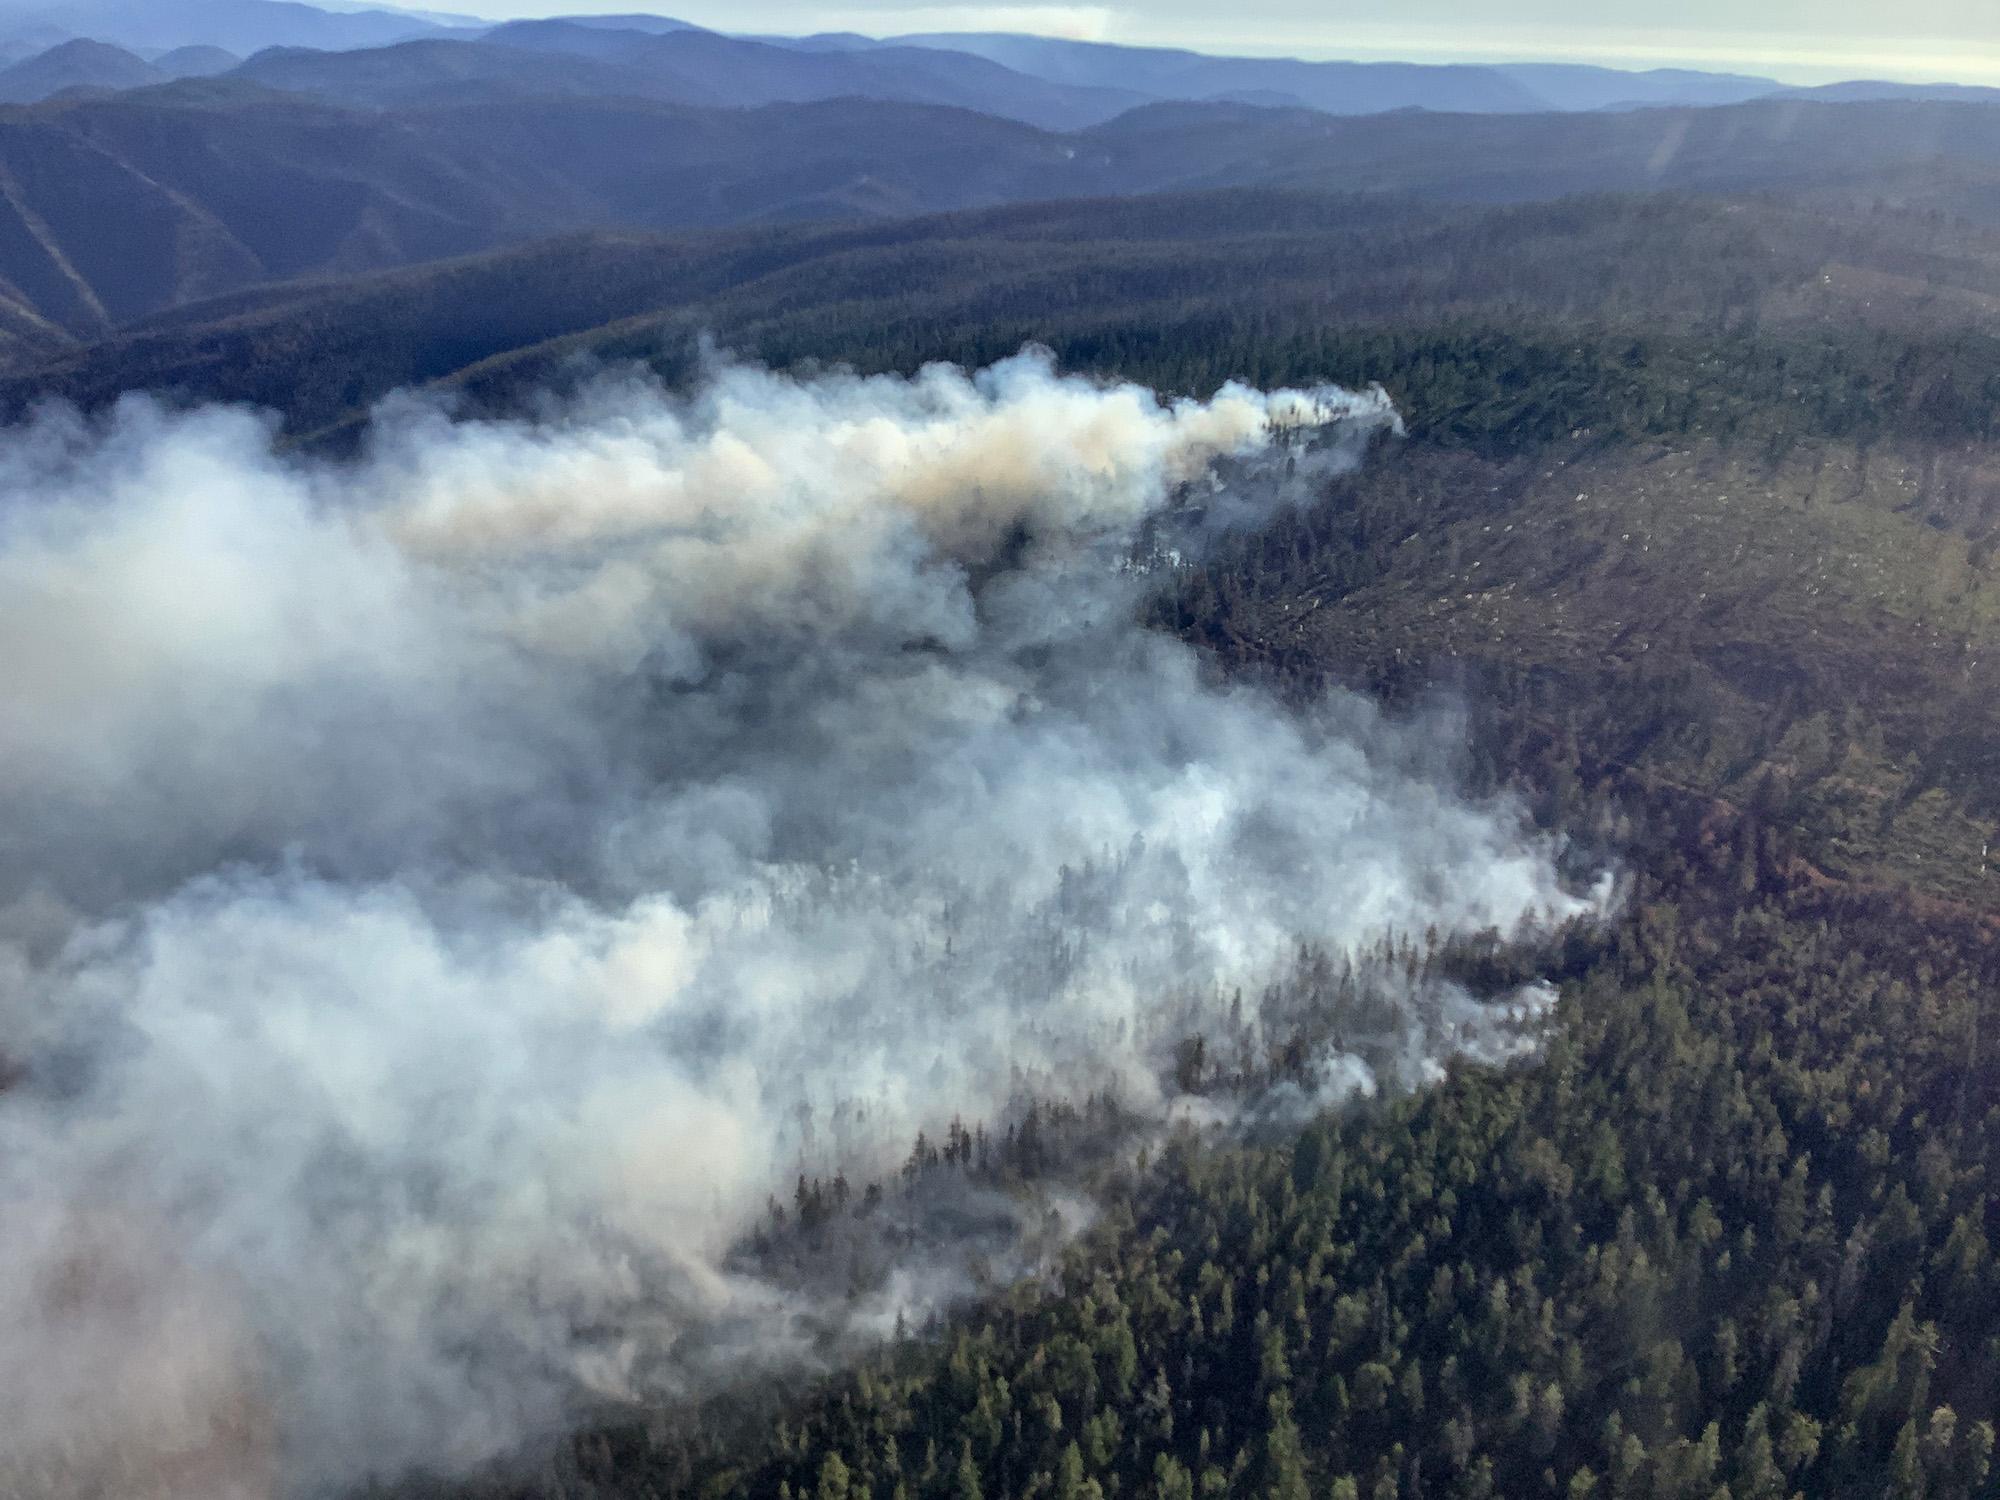 Plumes of smoke seen from an aerial view of a burn-out operation.